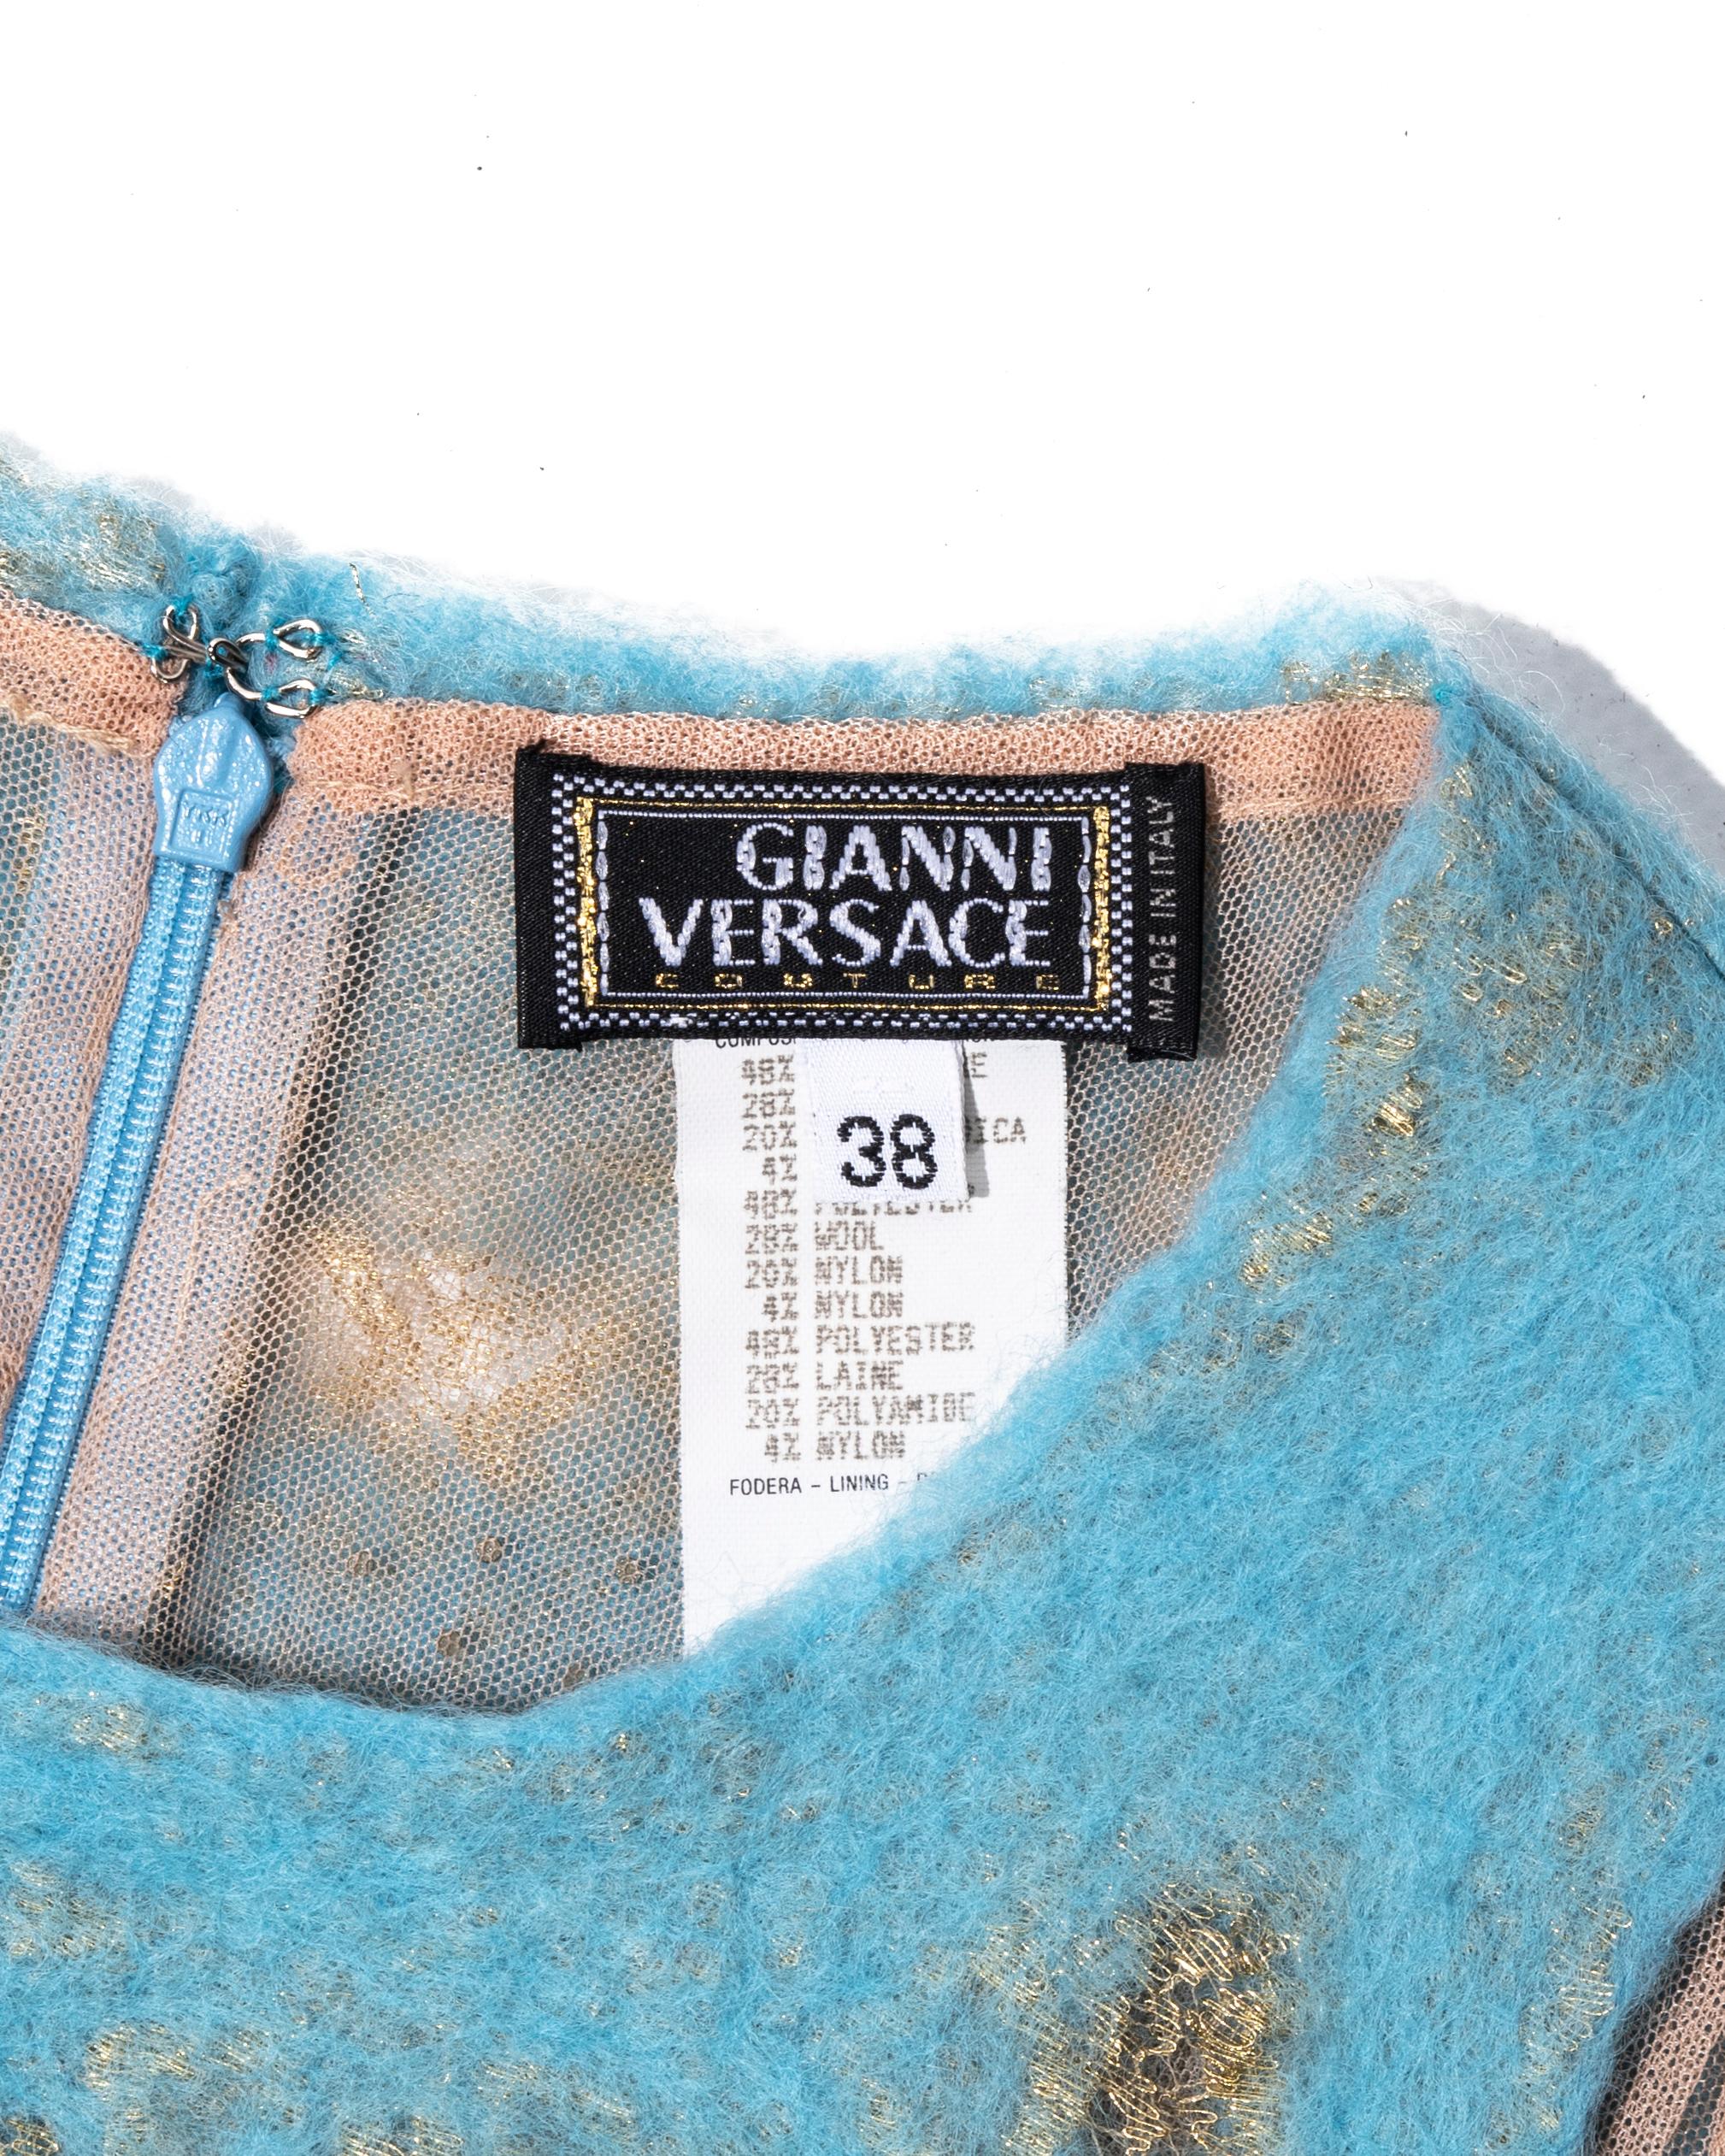 Gianni Versace aqua blue felted wool and gold lace top and skirt set, ss 1999 For Sale 5